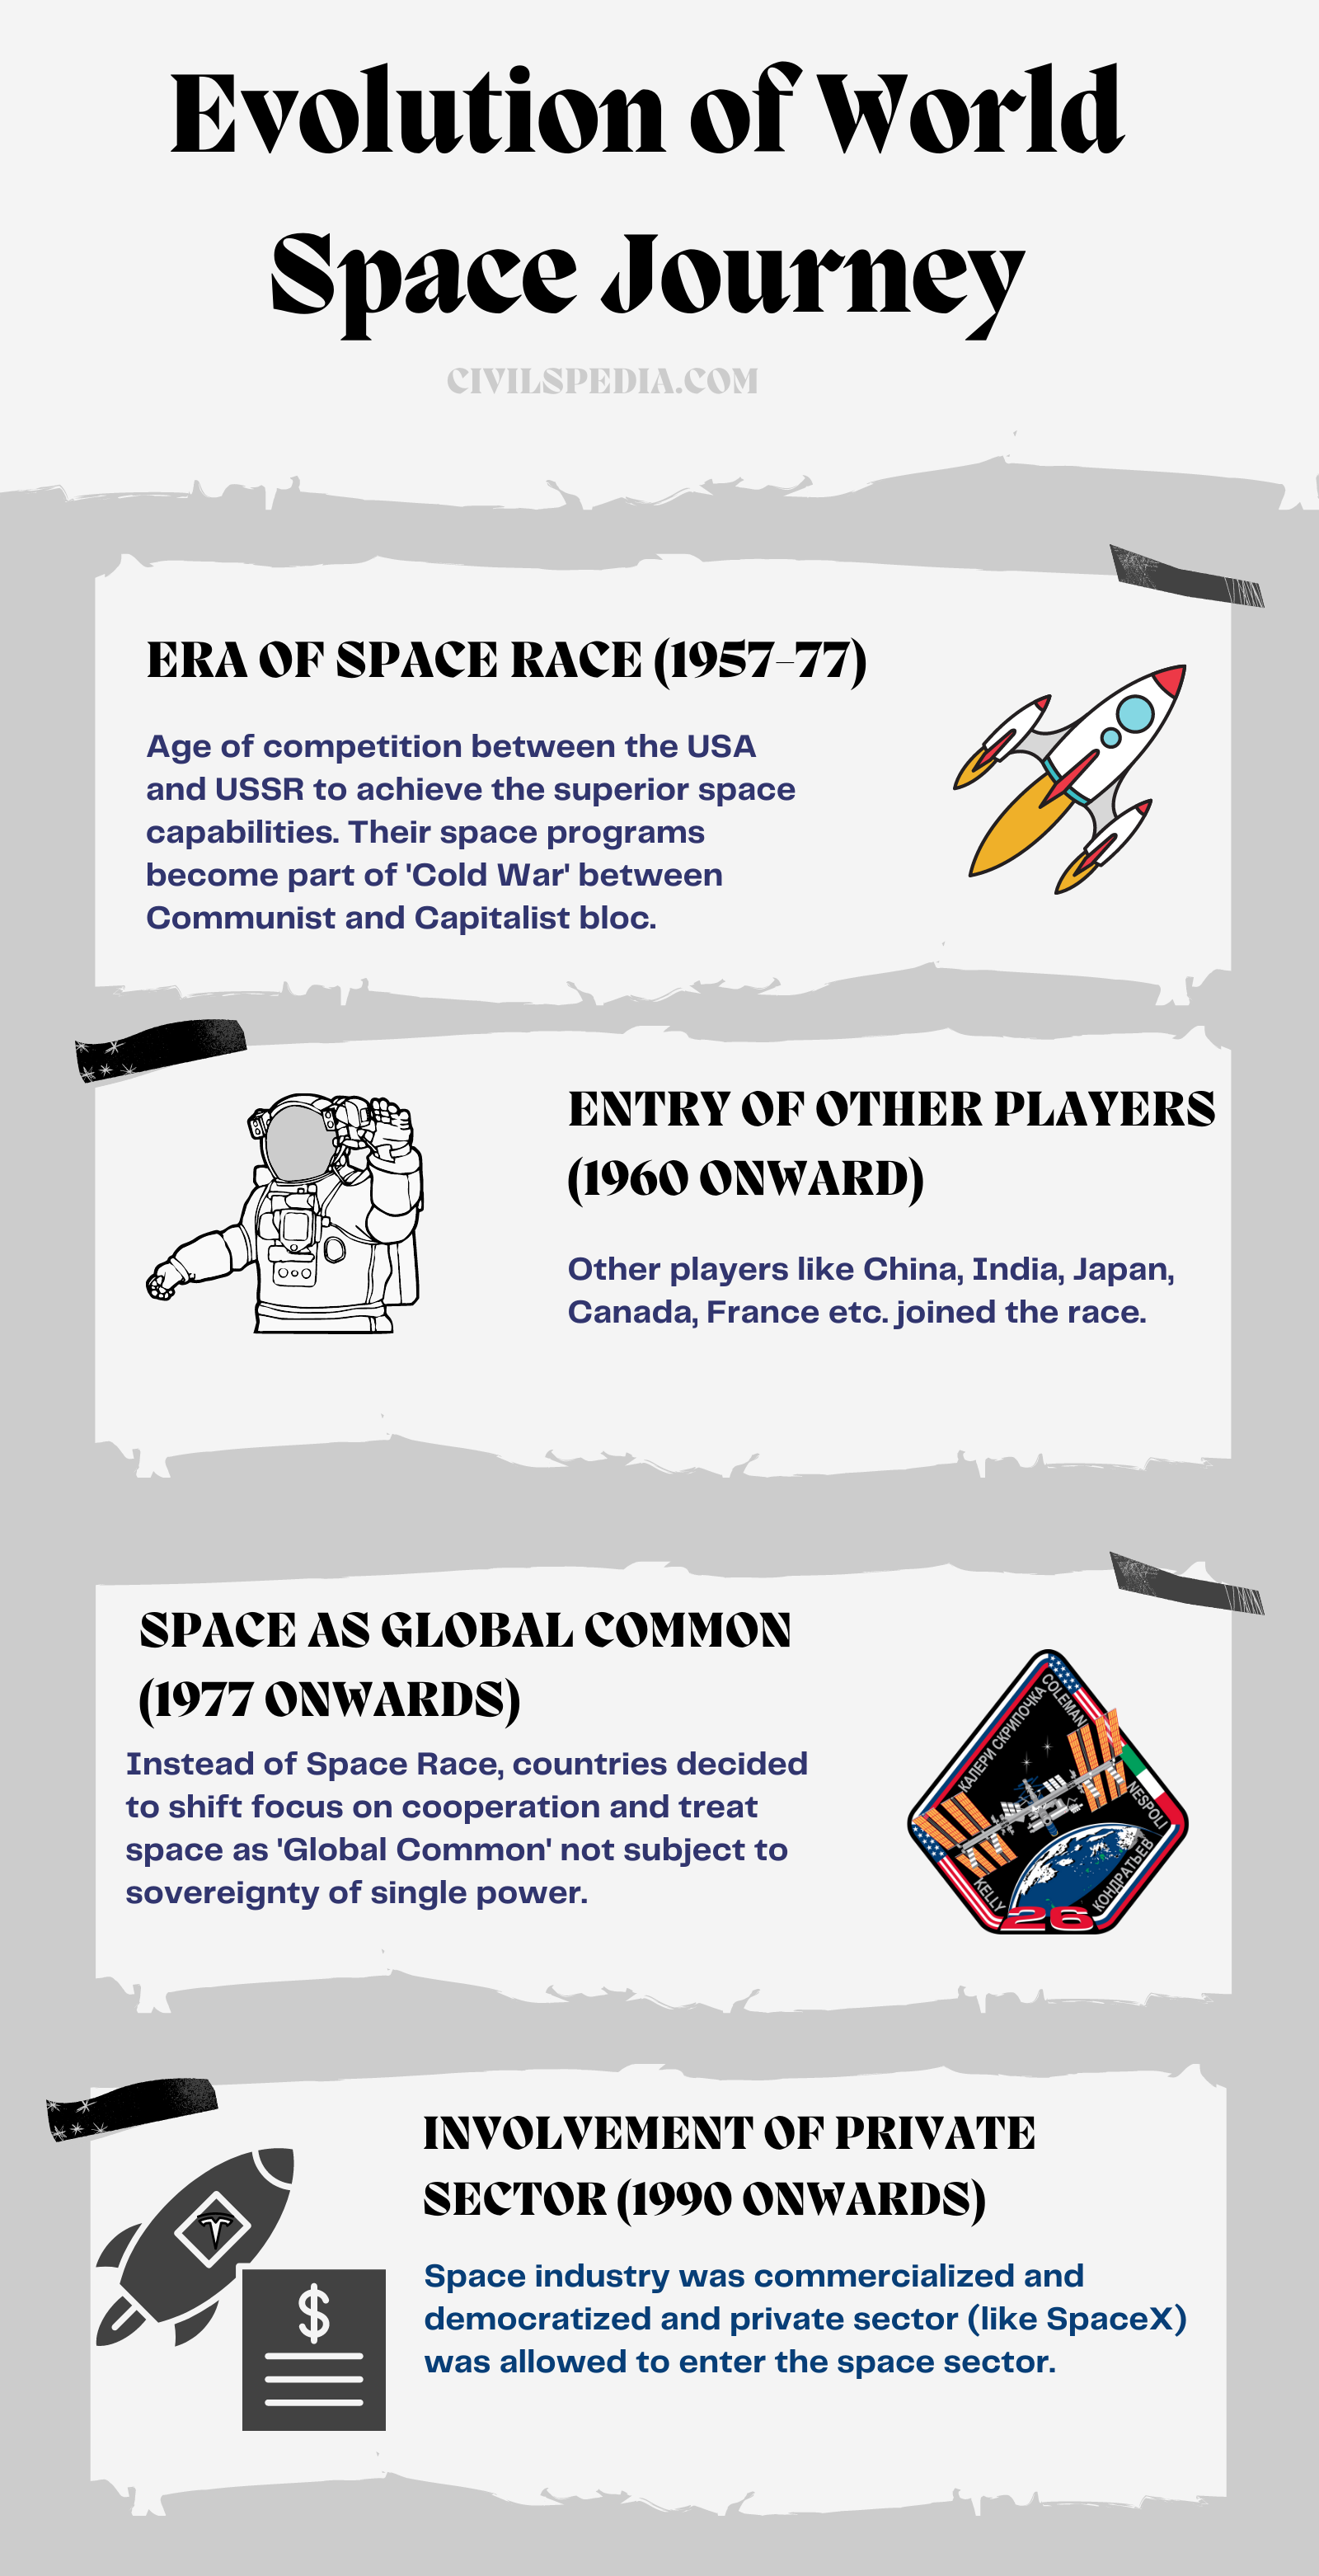 Timeline of developments in the Space Technology